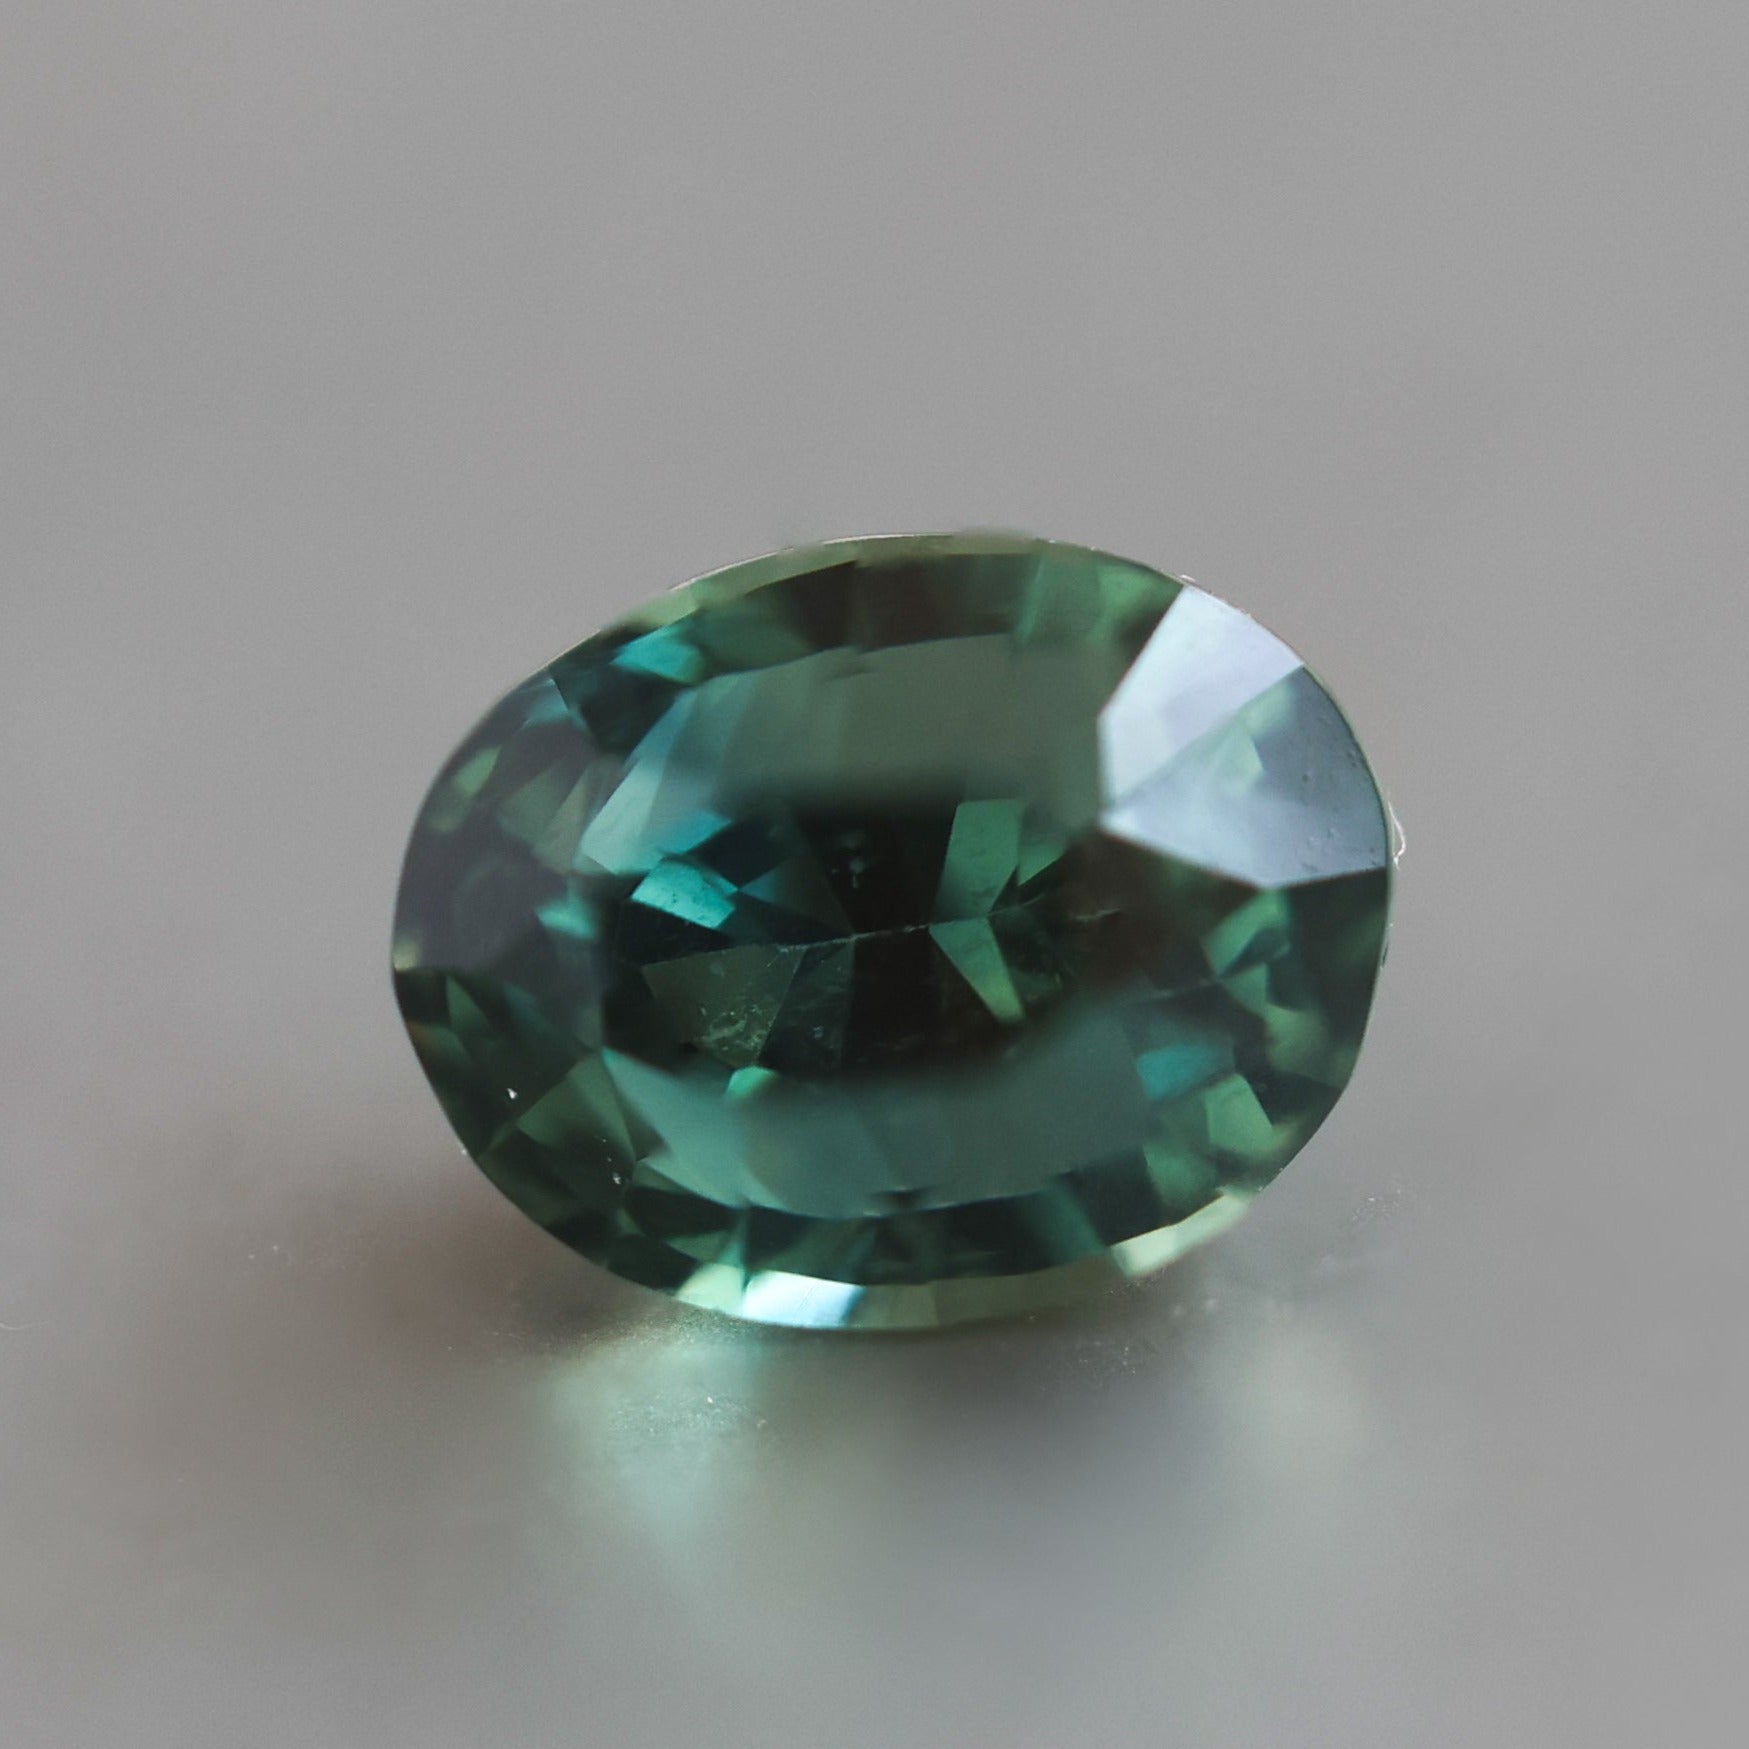 Loose 2 Ct Oval Teal Sapphire - setting 4